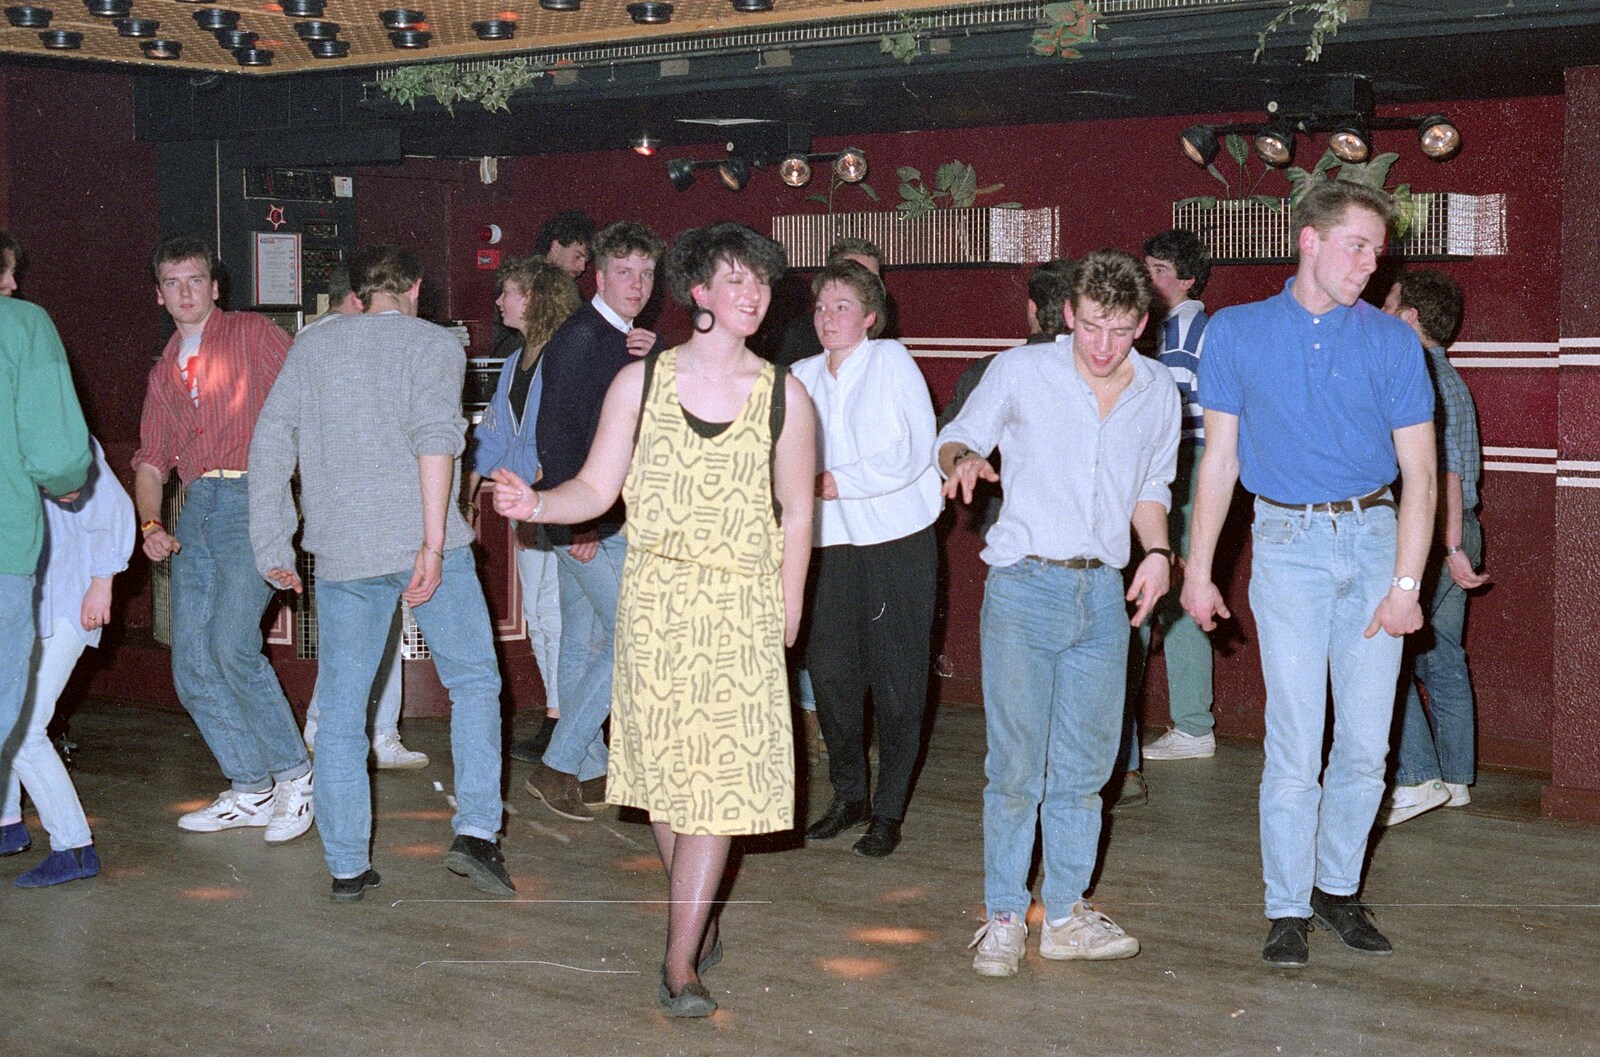 On the dancefloor from Uni: A Party in Snobs Nightclub, Mayflower Street, Plymouth - 18th October 1986